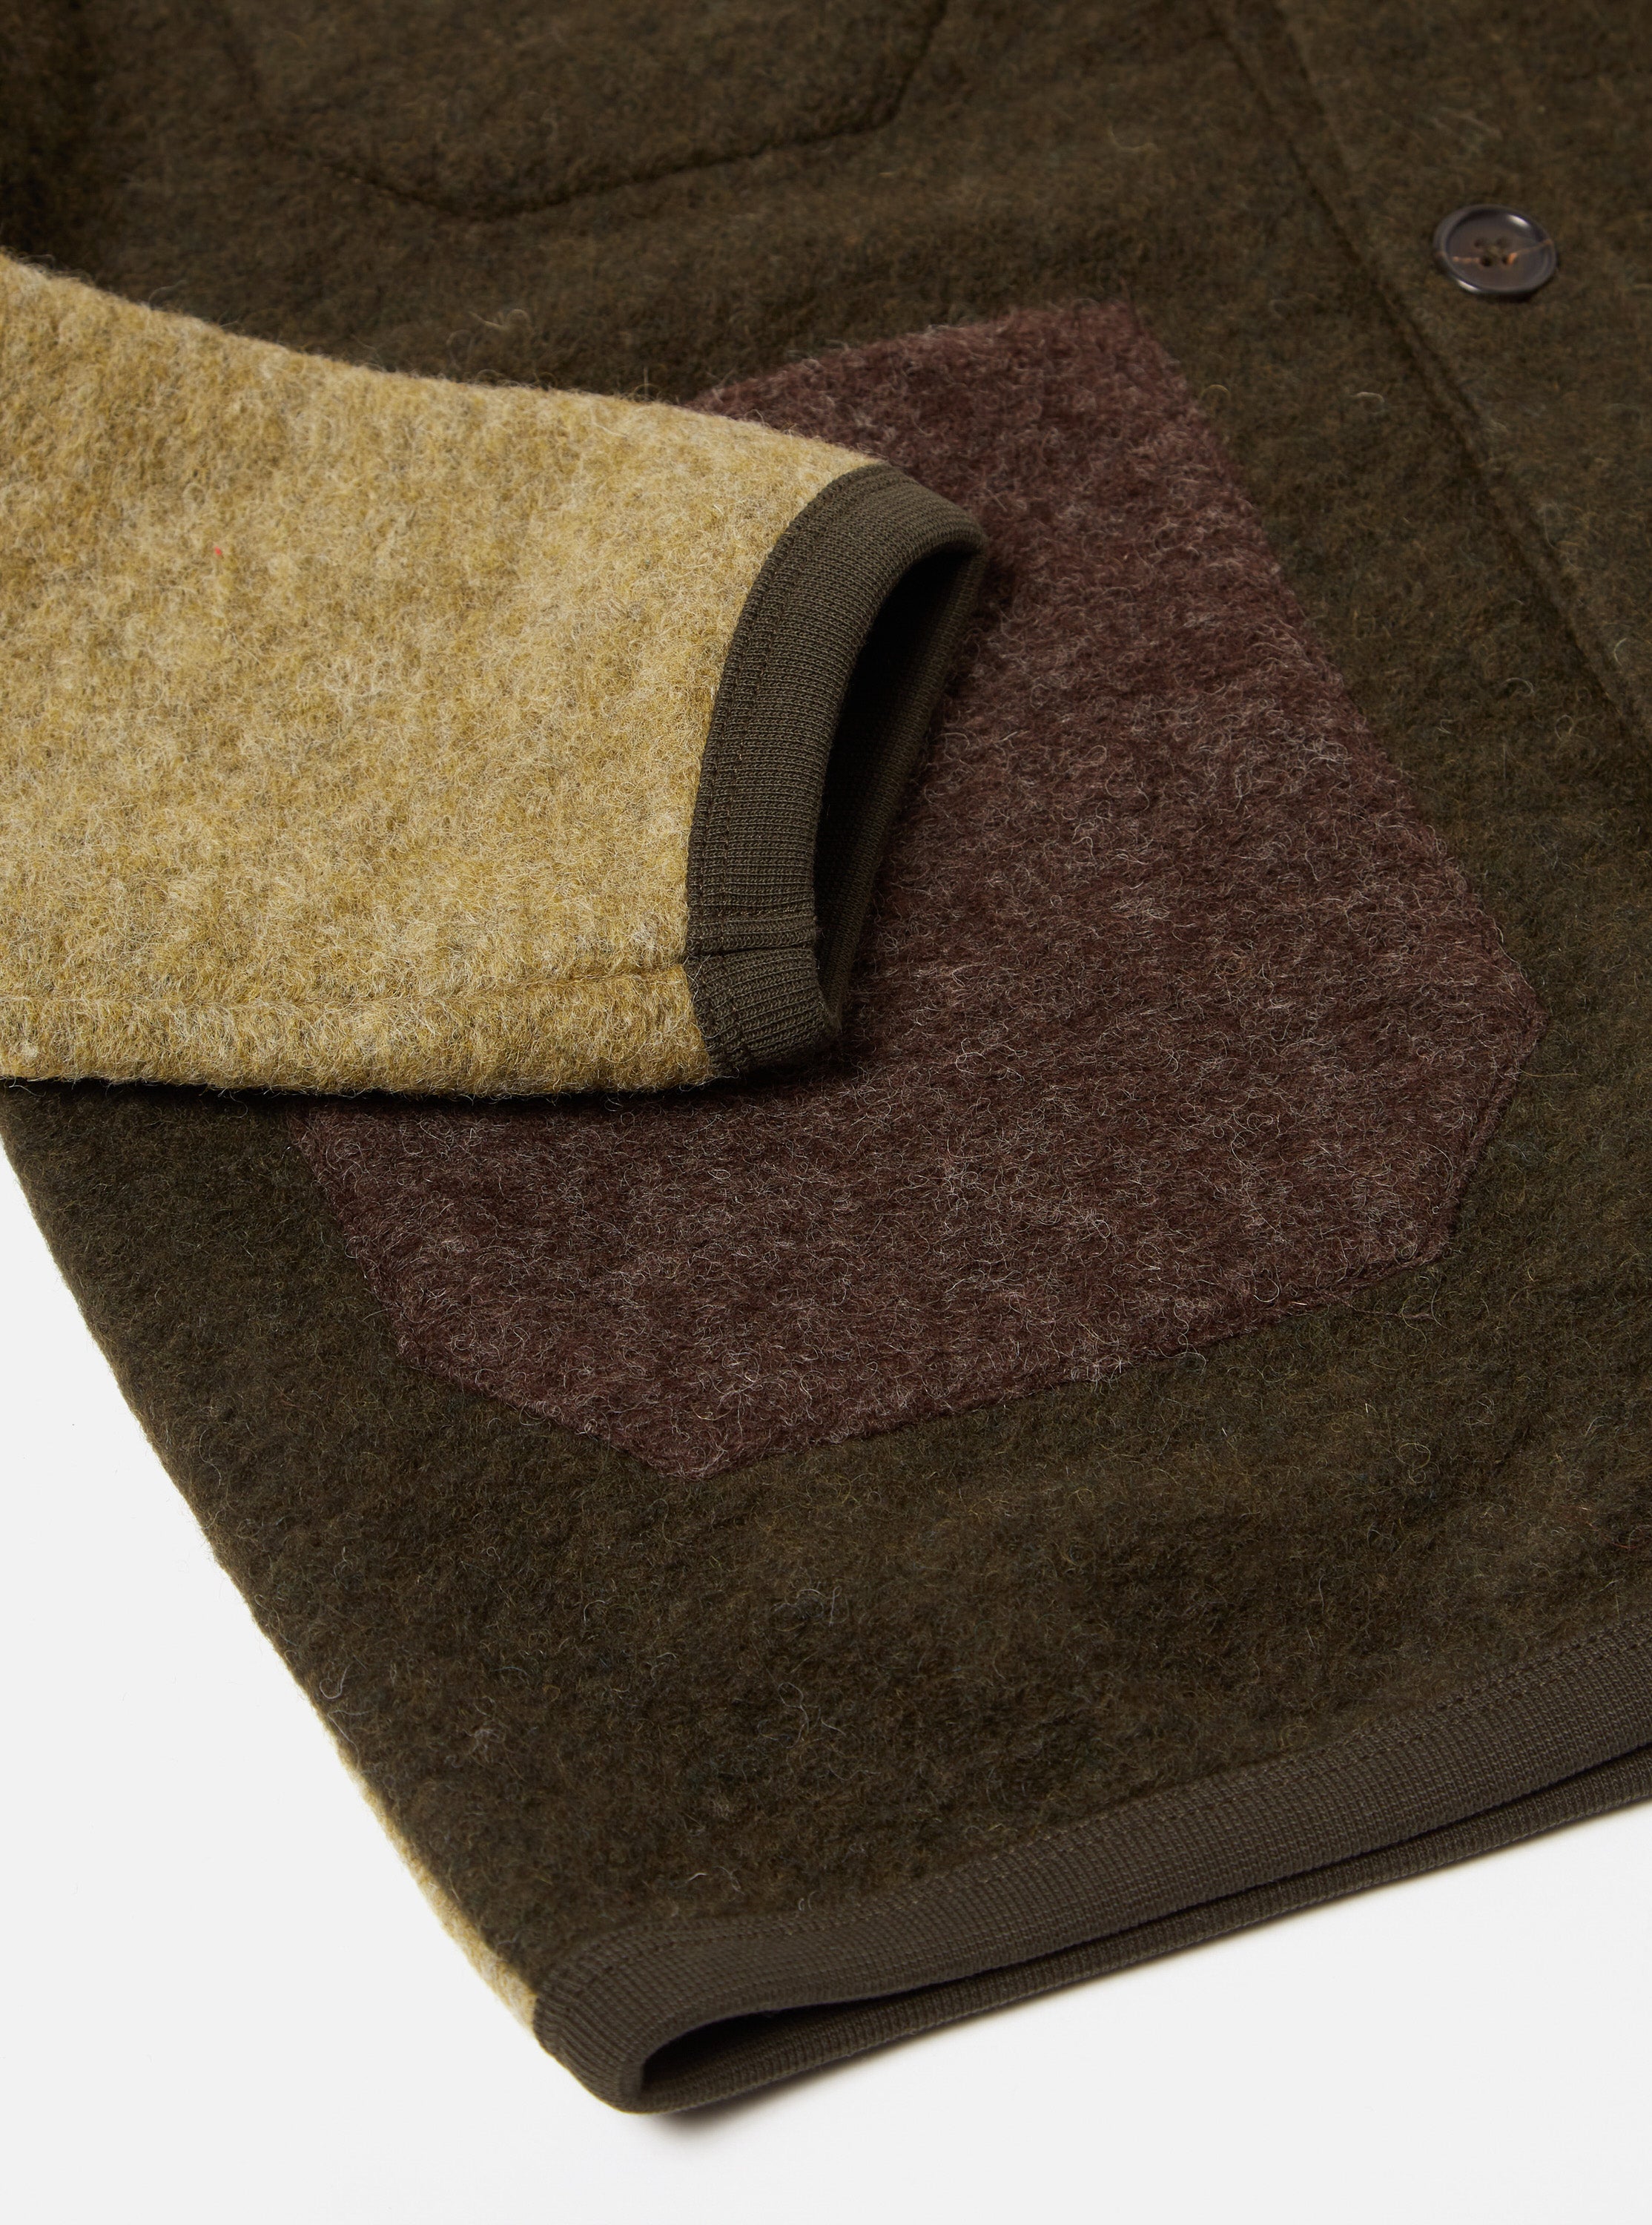 Universal Works Mixed Cardigan in Mixed Olive Wool Fleece